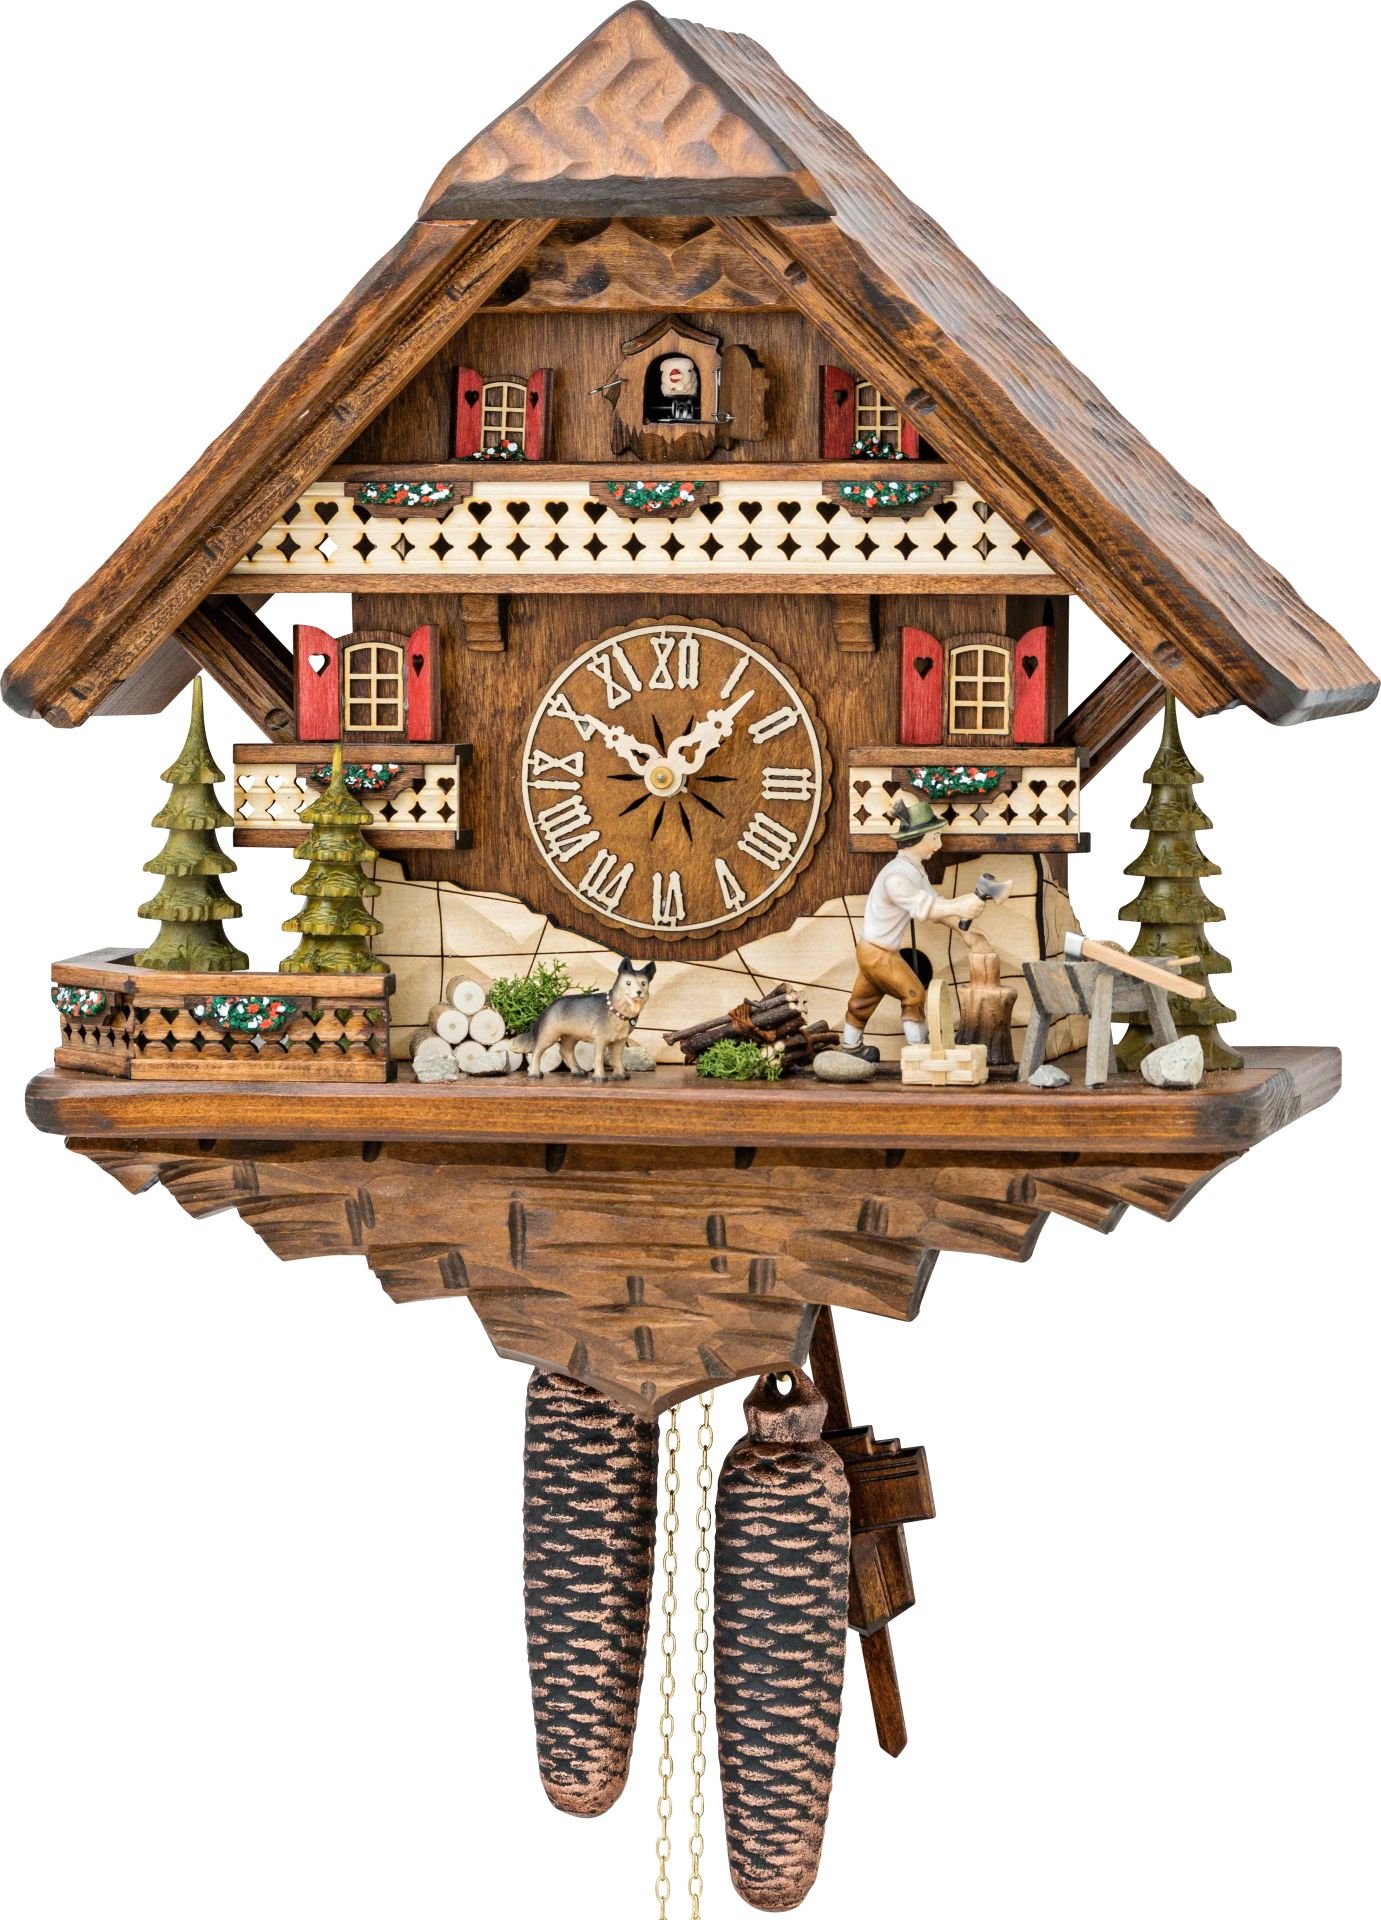 Cuckoo Clock Chalet Style 8 Day Movement 42cm by Hekas